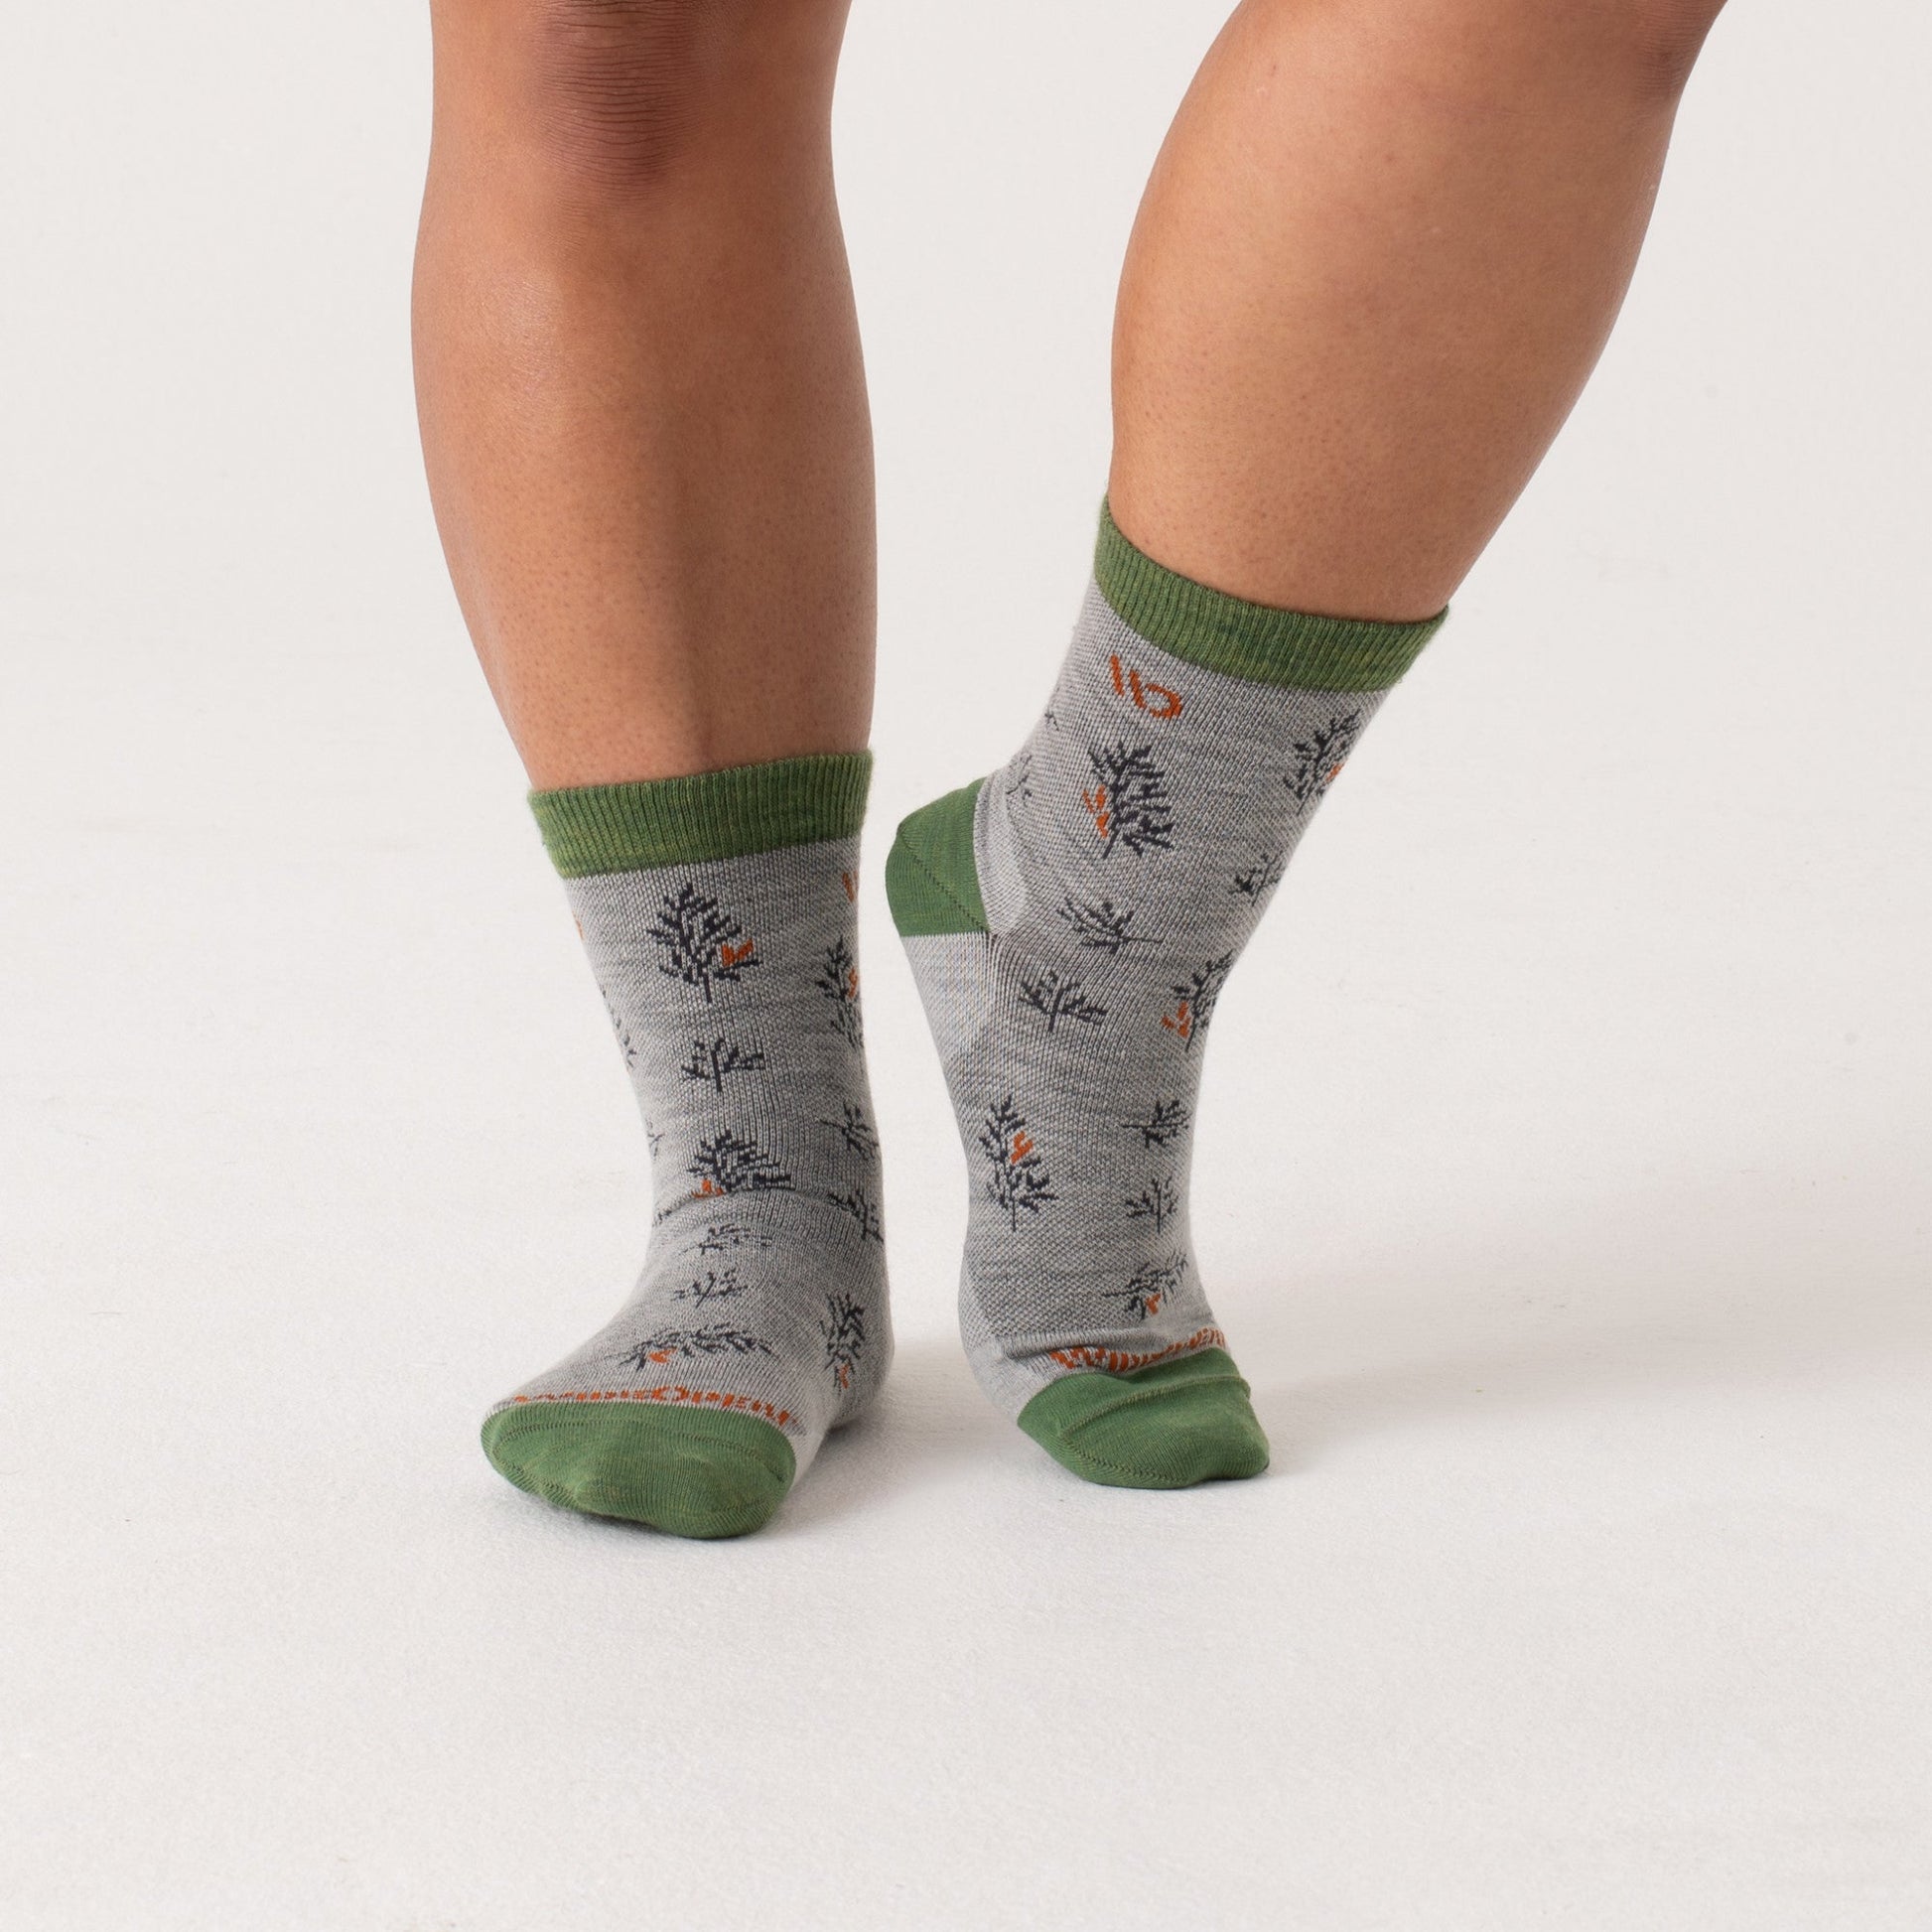 Micro Crew on model with green heel/toe/cuff, gray body and navy design --Light Gray/Teal/Denim/Taupe